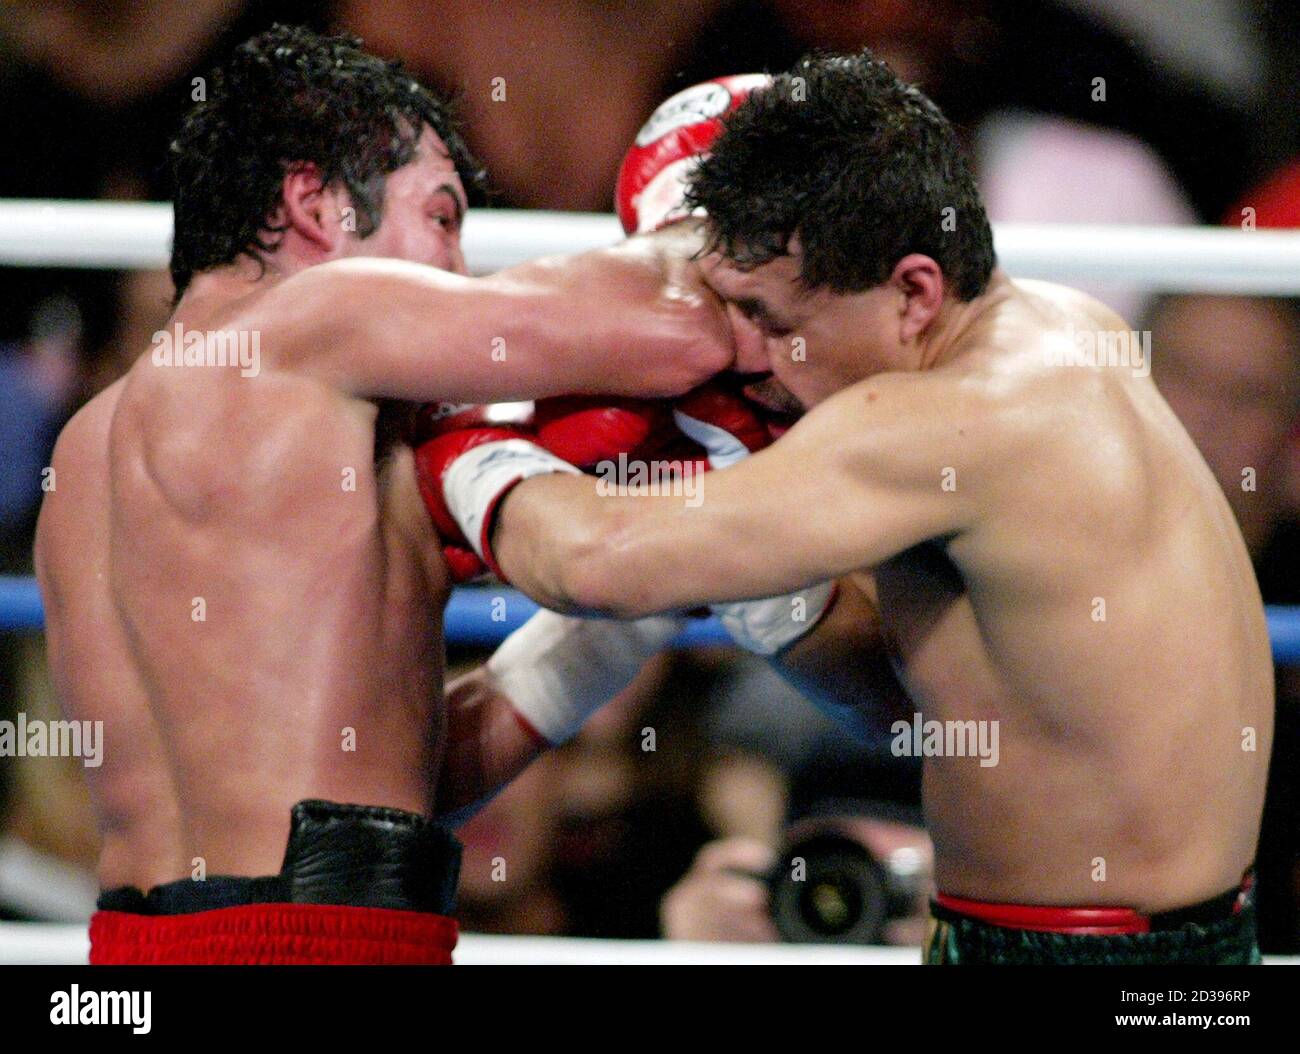 Yory Boy Campas of Navojoa, Mexico, (R) takes an elbow from Oscar De La Hoya of Los Angeles, California, during the sixth round of their WBC/WBA welterweight championship fight at the Mandalay Bay Events Center in Las Vegas, Nevada, May 3, 2003. De La Hoya retained his title when the referee stopped the fight in the seventh round. Picture taken May 3, 2003. REUTERS/Ethan Miller  EM/HB Stock Photo